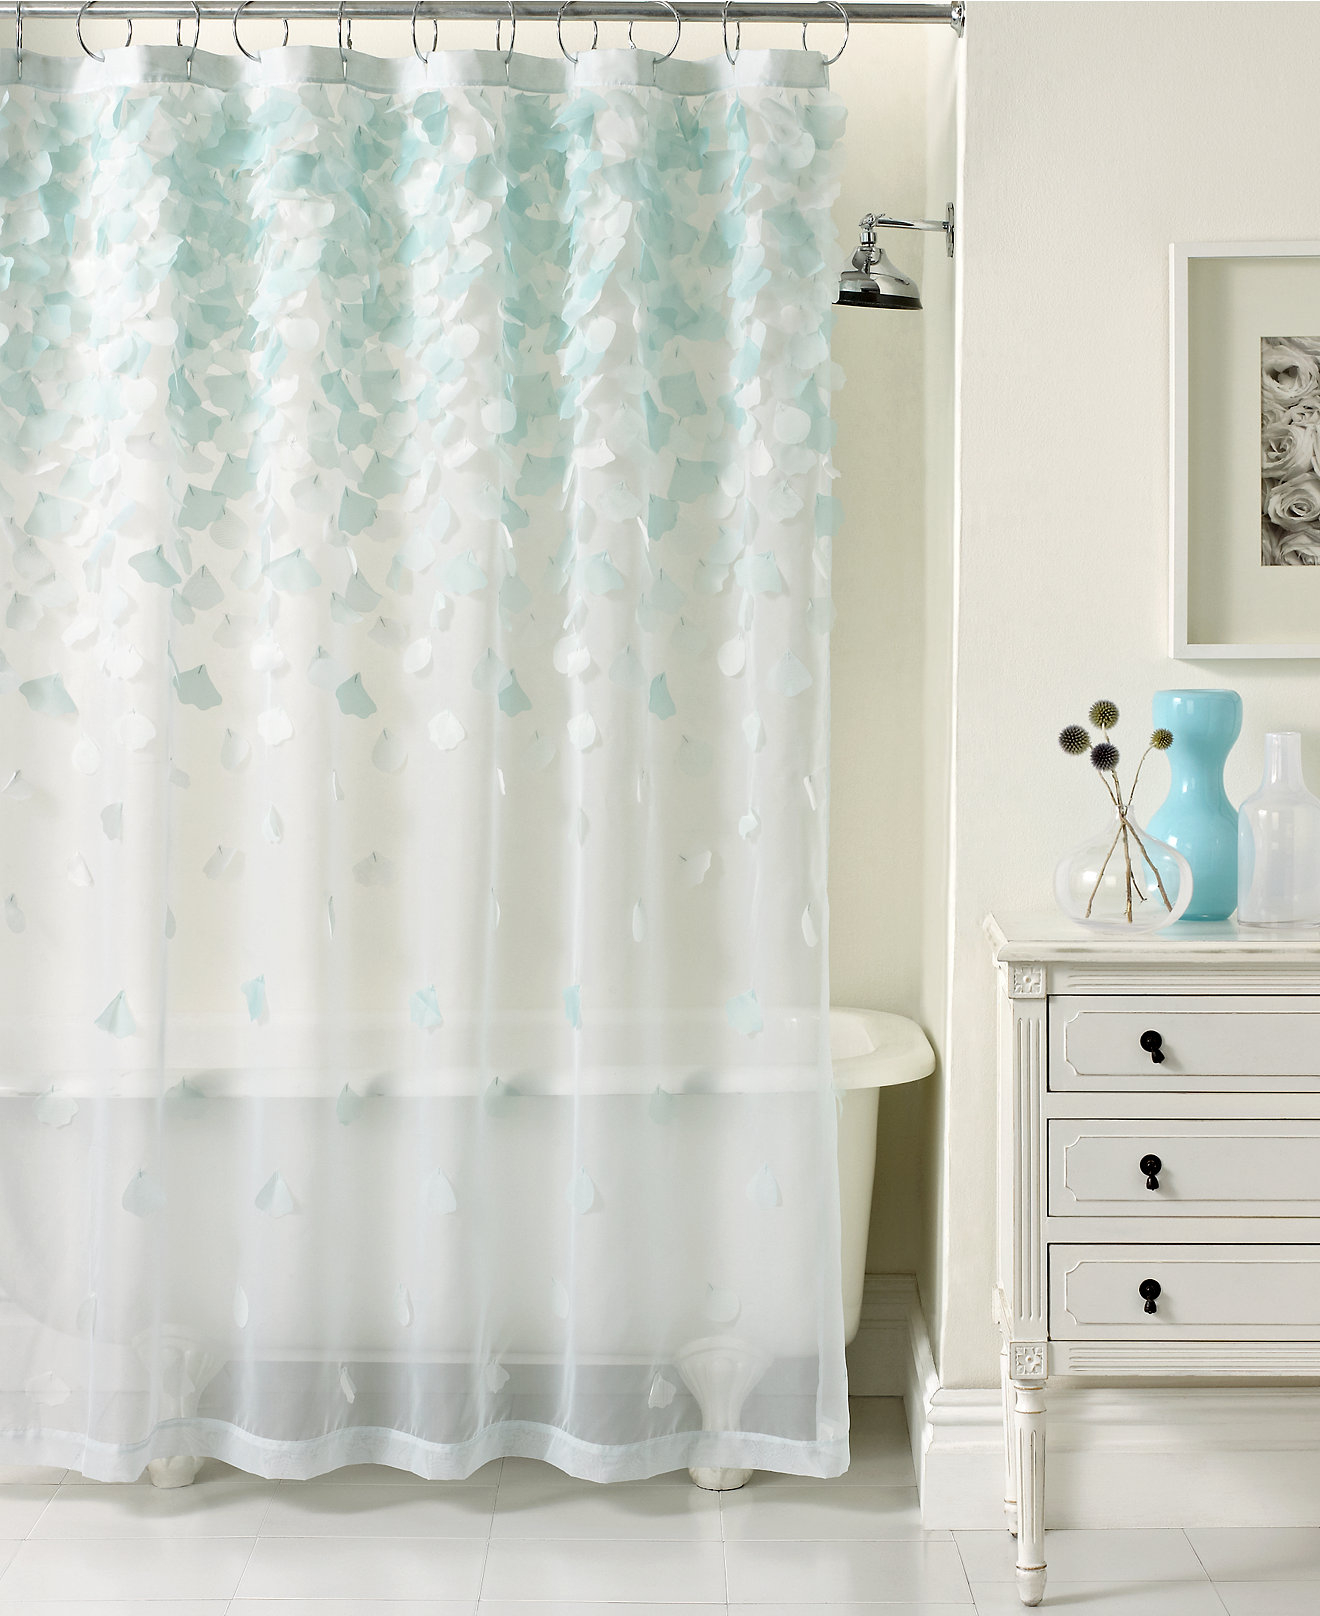 Sheer shower curtains